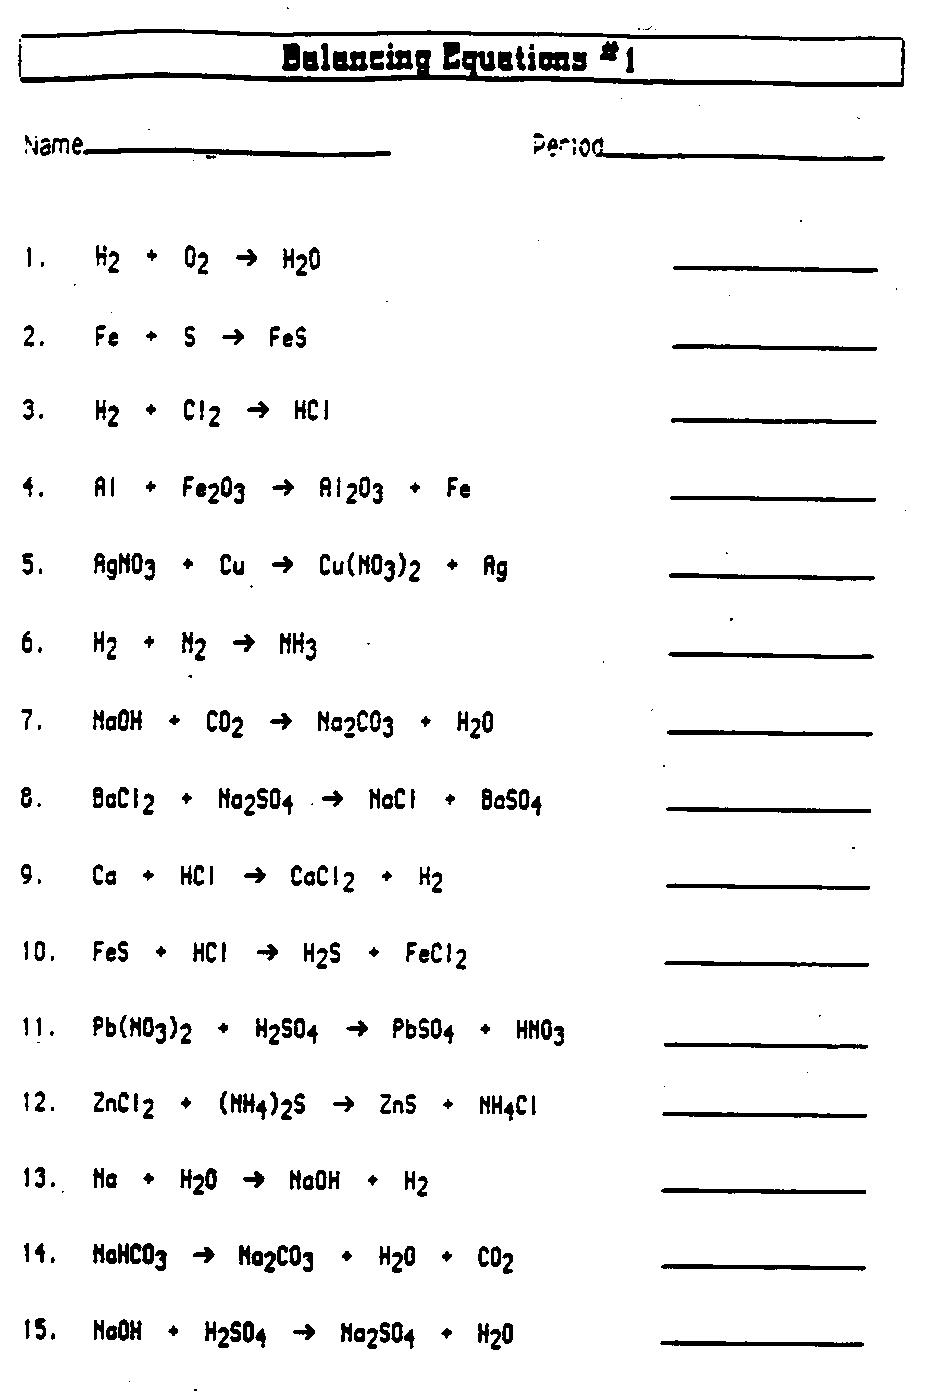 15 Best Images of Chemical Reactions Worksheet With Answers - Types